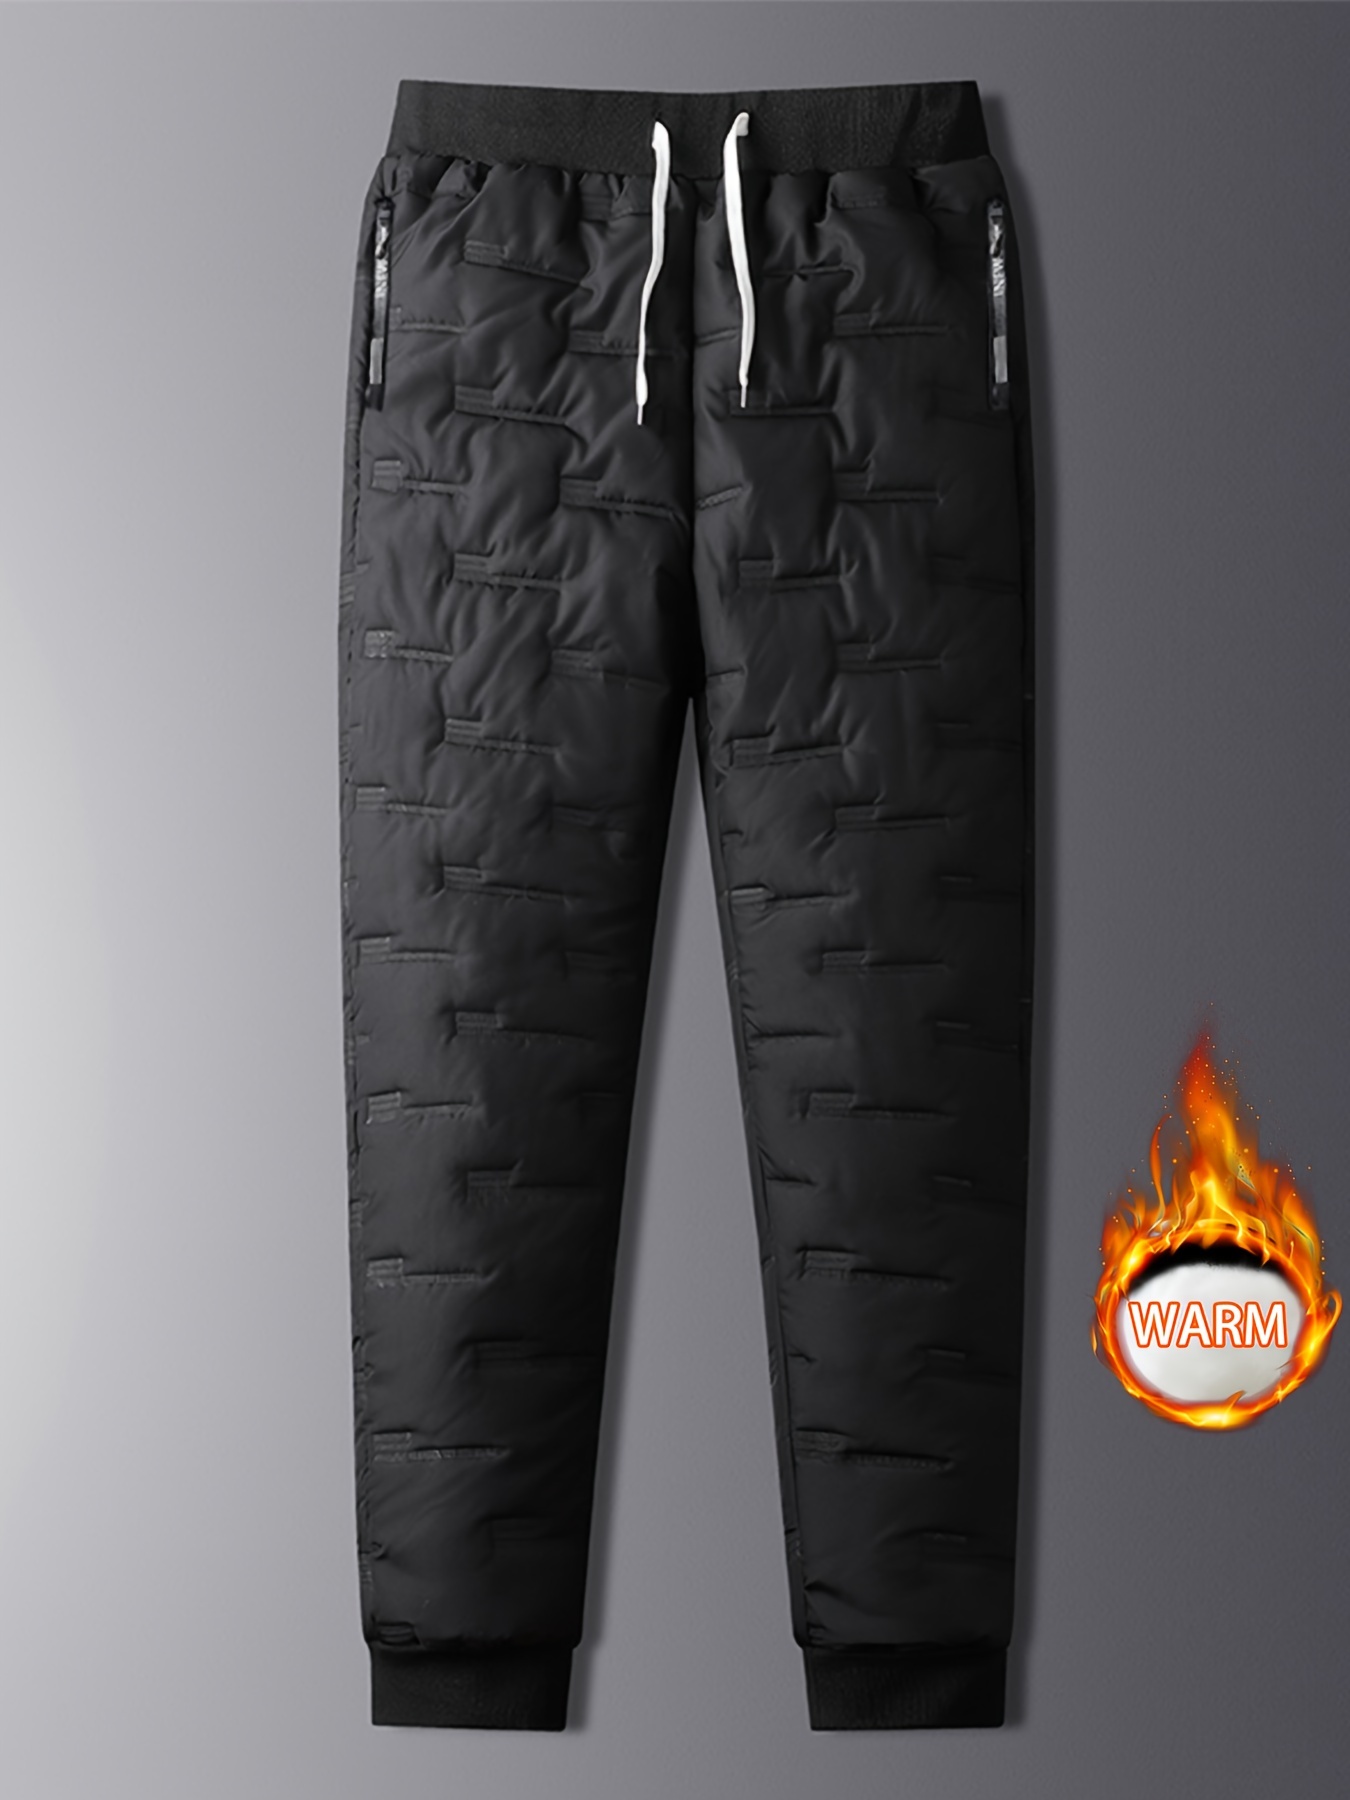 Men's Thermal Fleece Pants, Casual Warm Joggers For Fall Winter Outdoor